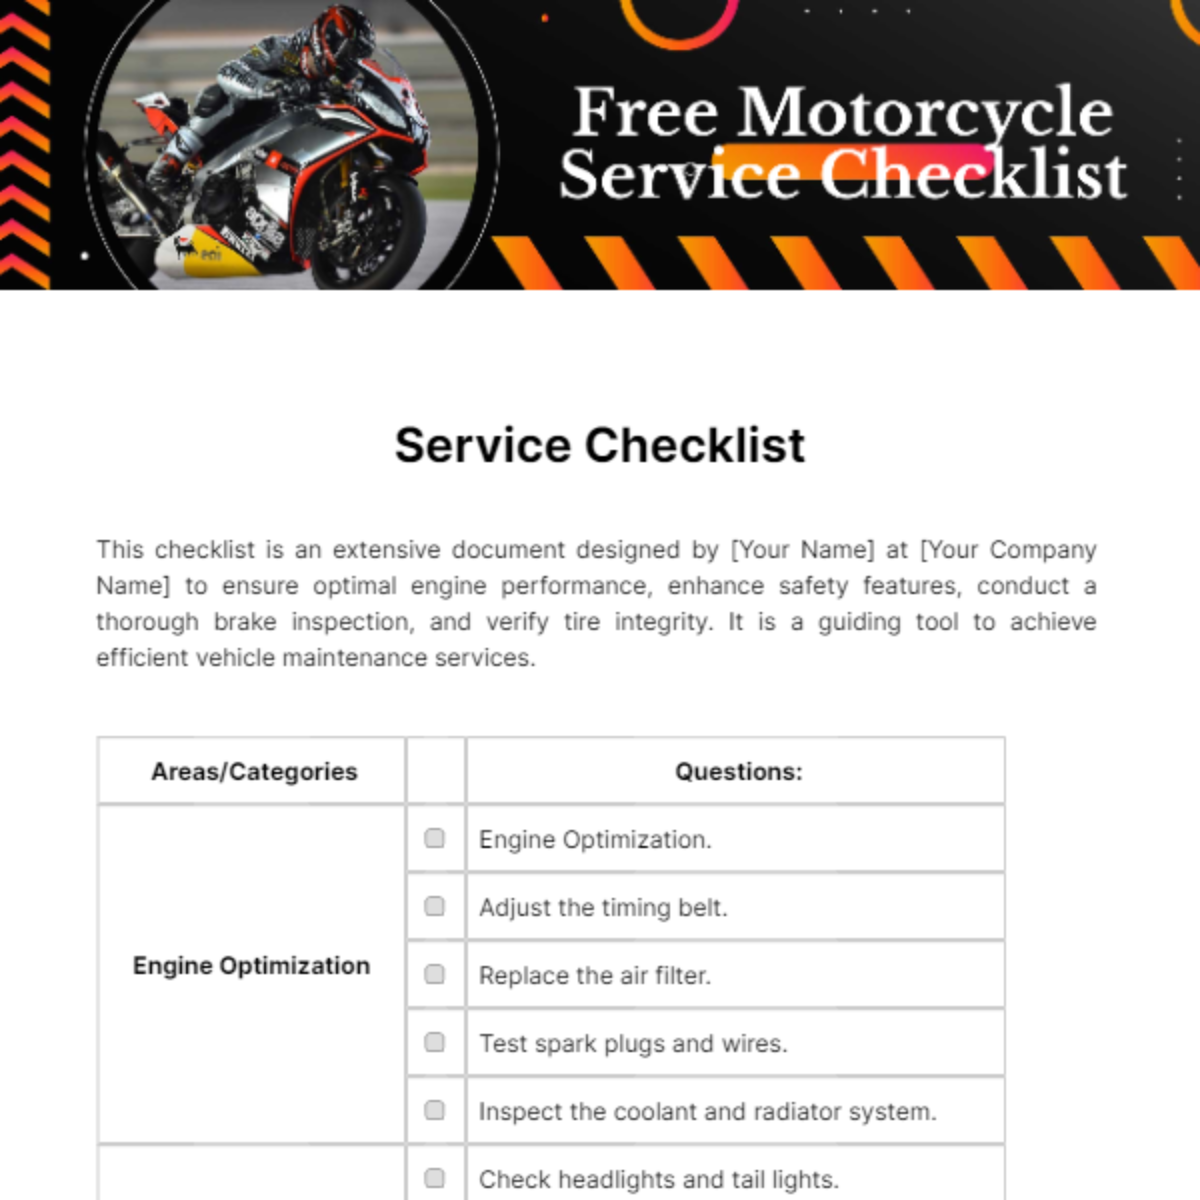 Free Motorcycle Service Checklist Template